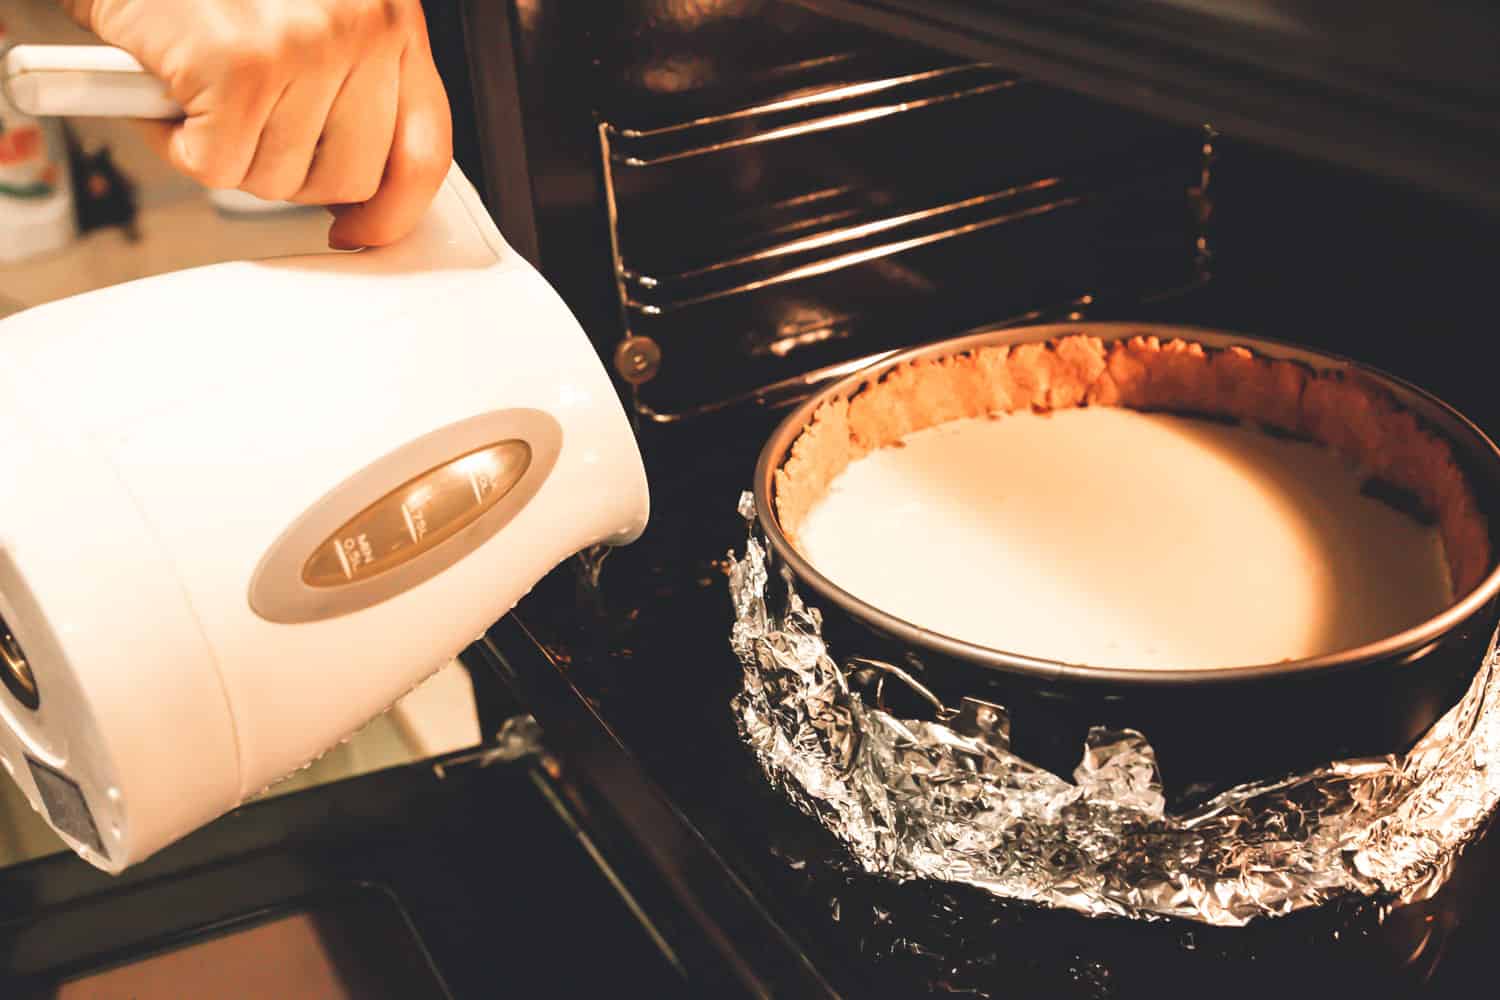 Pouring water bath for cheesecake inside the oven